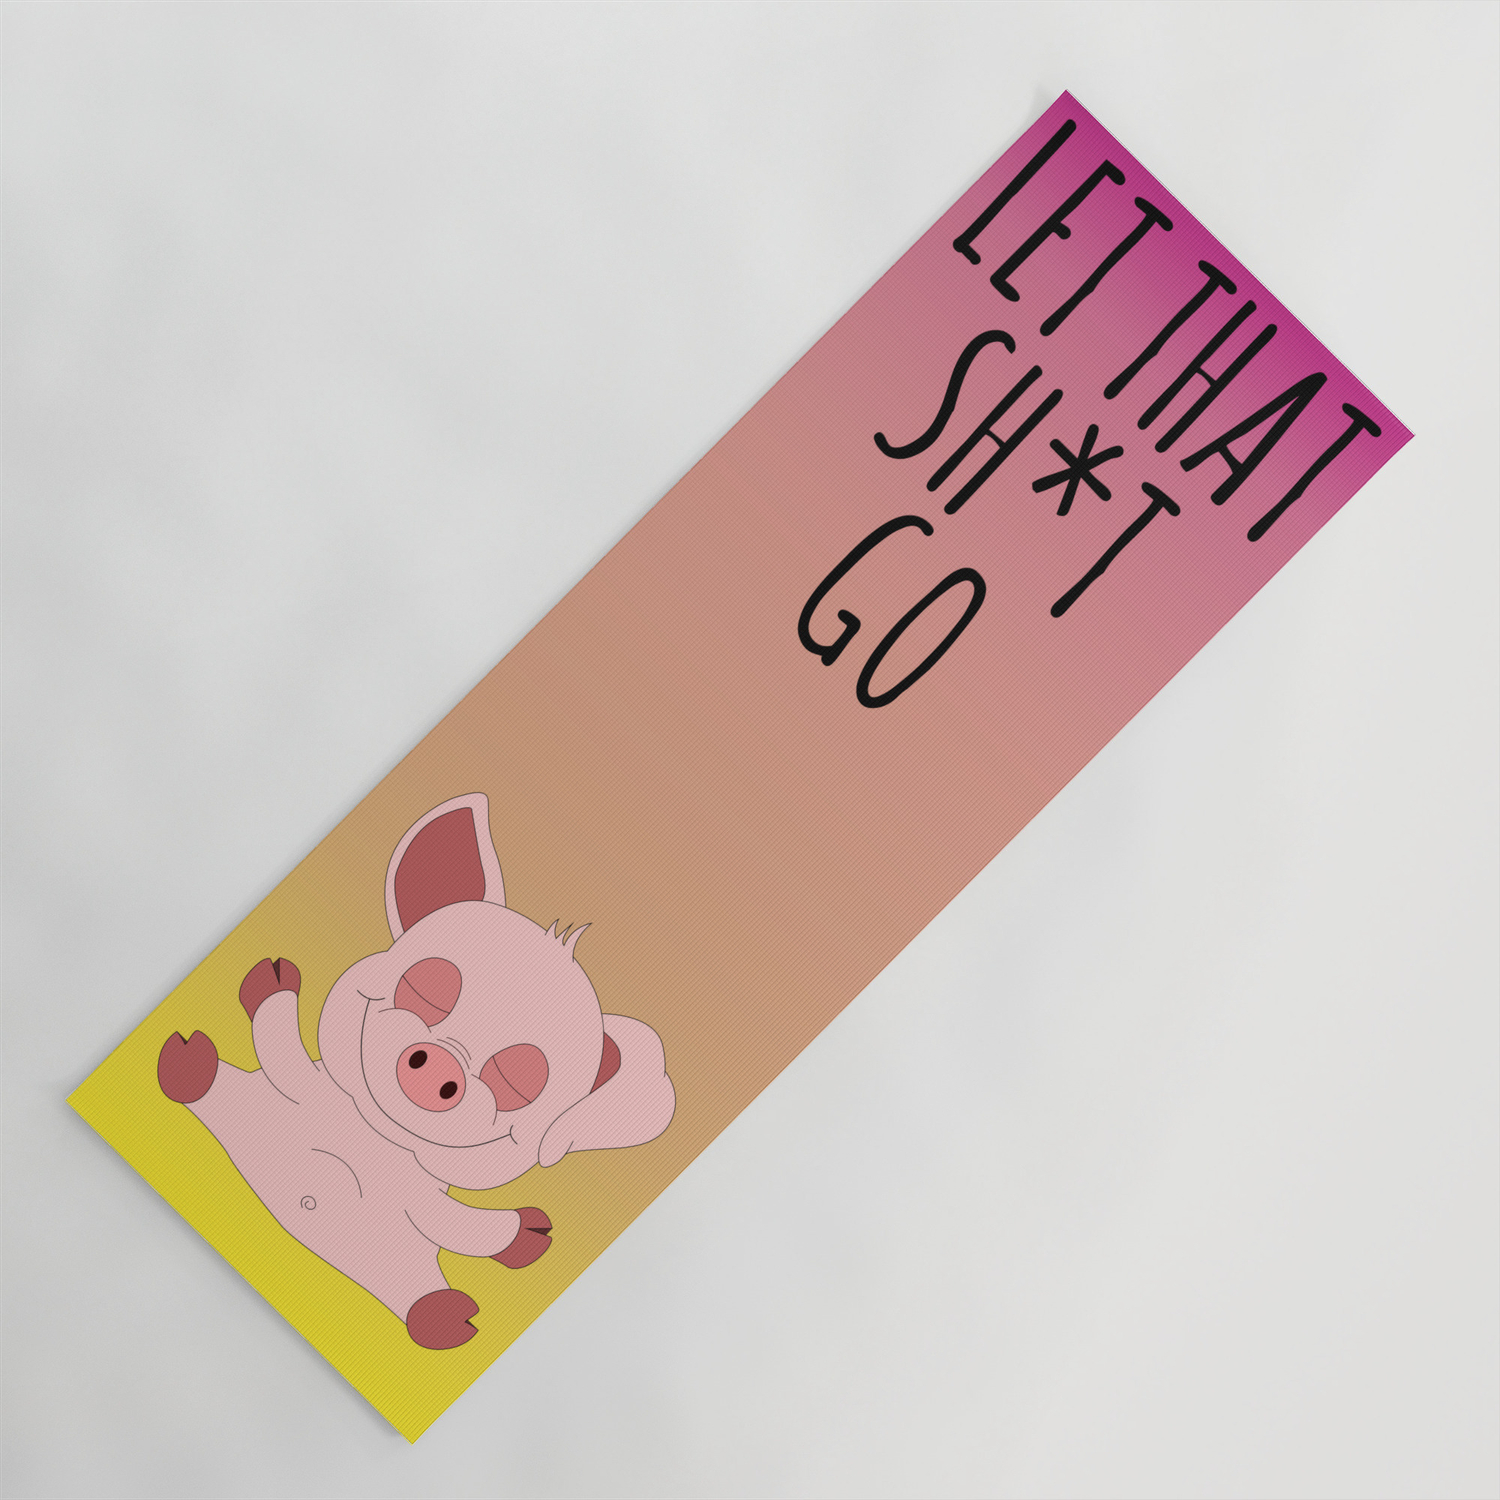 Funny Yoga Quotes With A Pig Yoga Mat by Basti | Society6